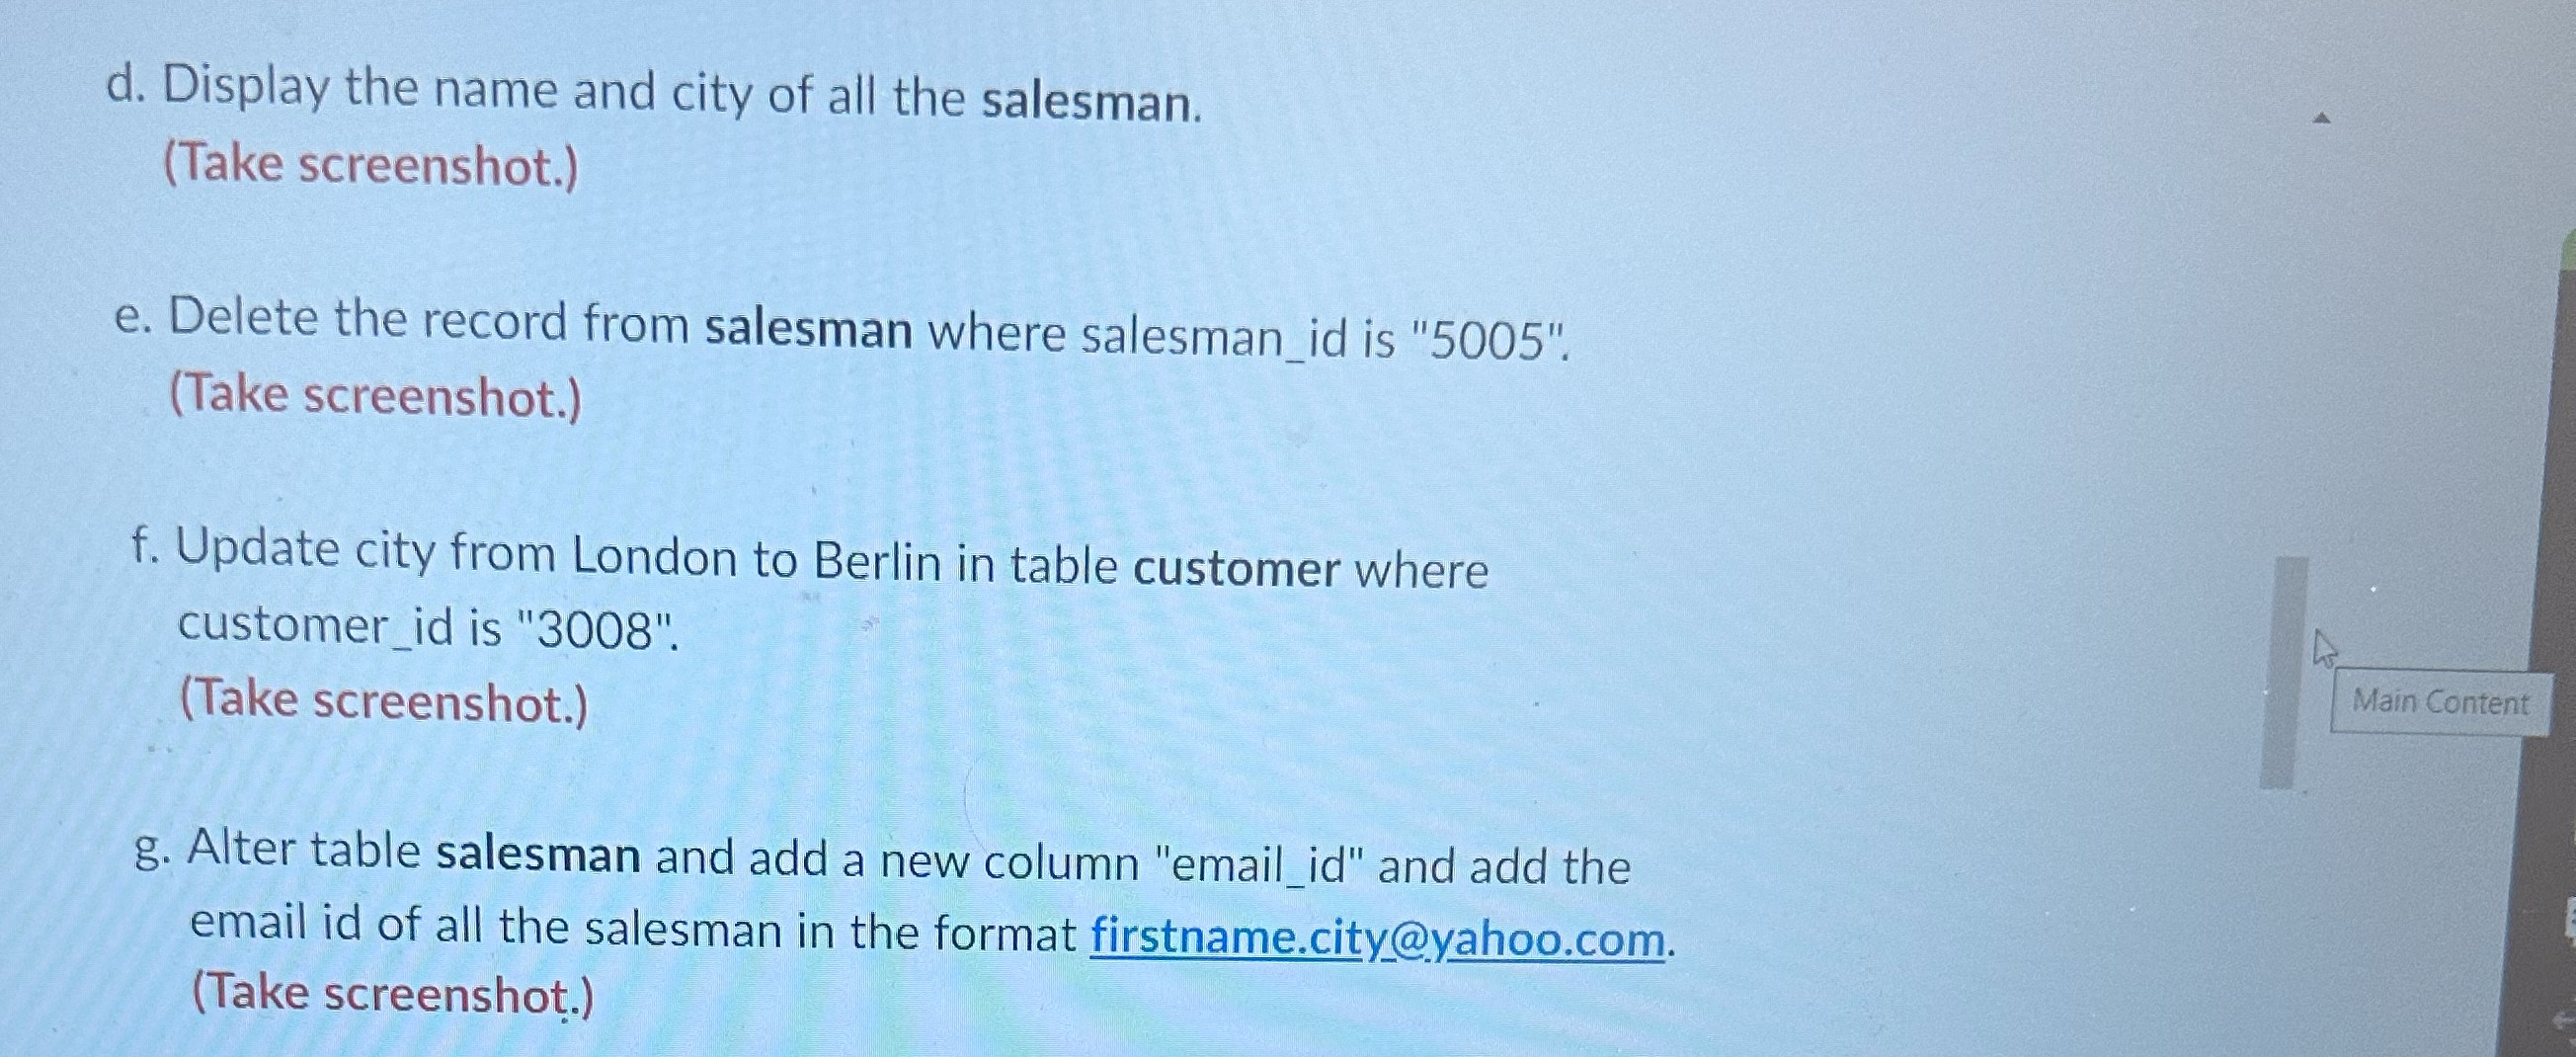 d. Display the name and city of all the salesman. (Take screenshot.) e. Delete the record from salesman where